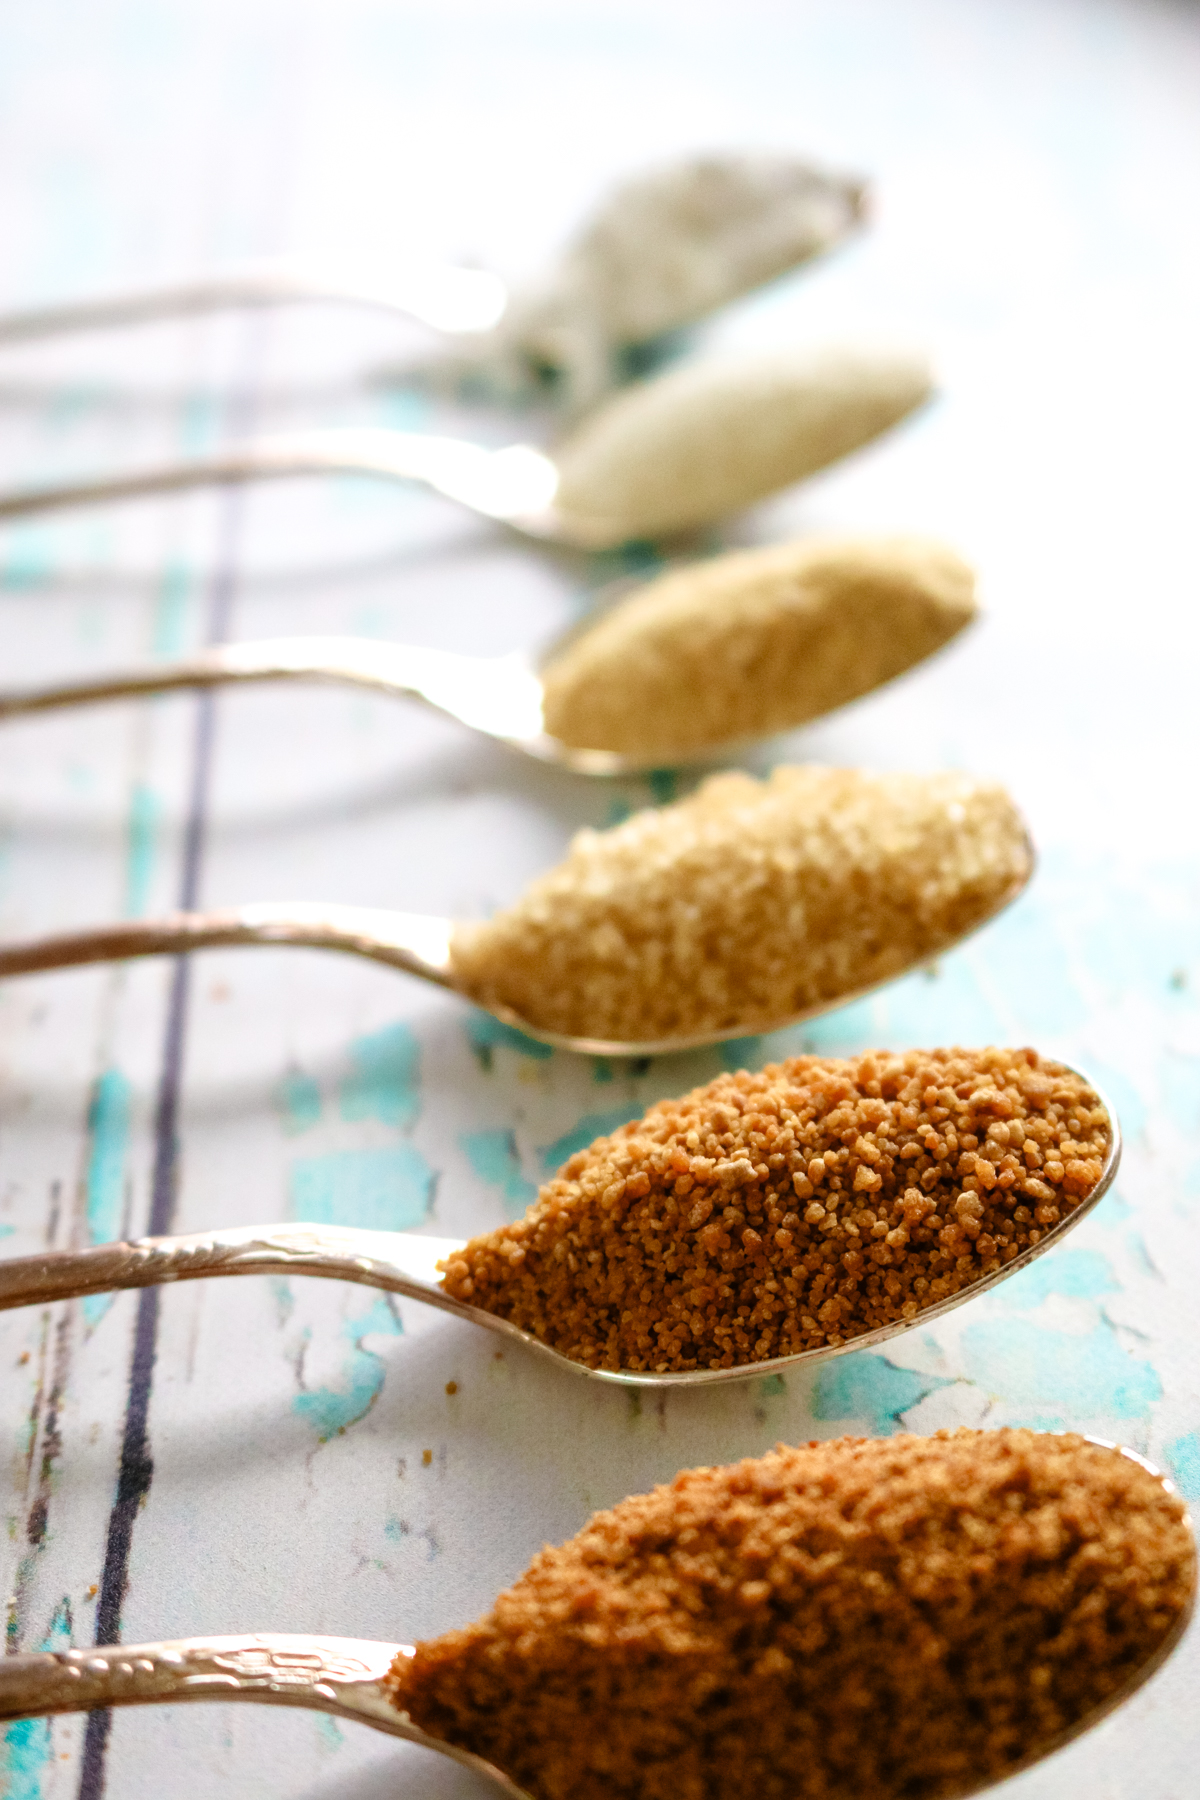 spoonfuls of unrefined sugar like coconut sugar and other sugars.